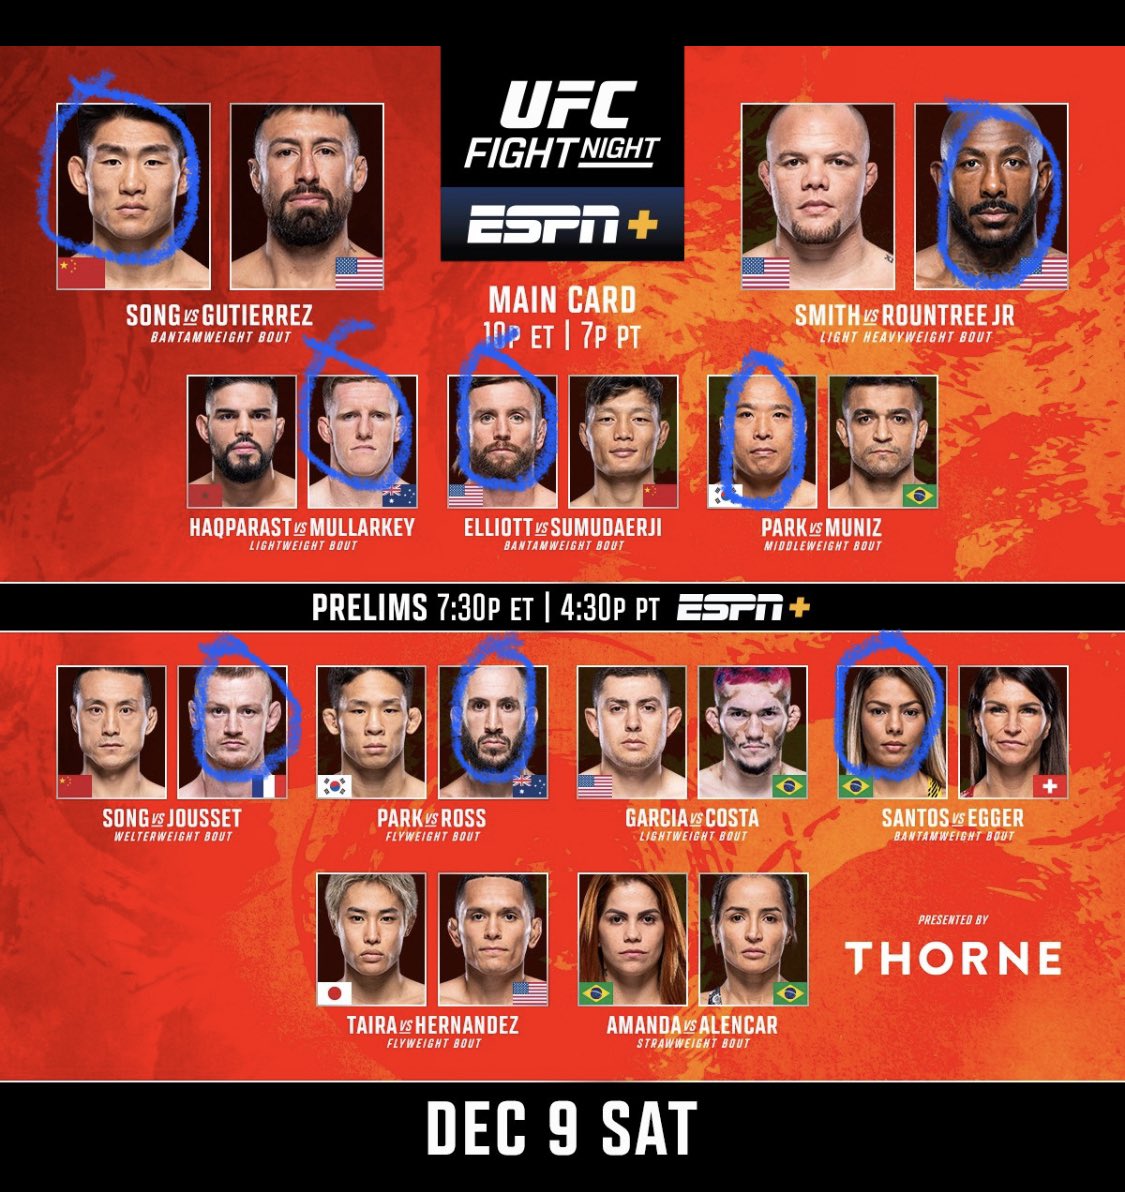 A tad late but this is what i have for tonight guys . @SpinninBackfist @SpikeBoyQ @juice_2389 @JackMacCFB @DoubleVodkaDon @PhiLeePhilly @SpeakEZsports_ #UFCVegas83

P.S. no way smith/Rountree Jr or Mullarkey fights go the distance.